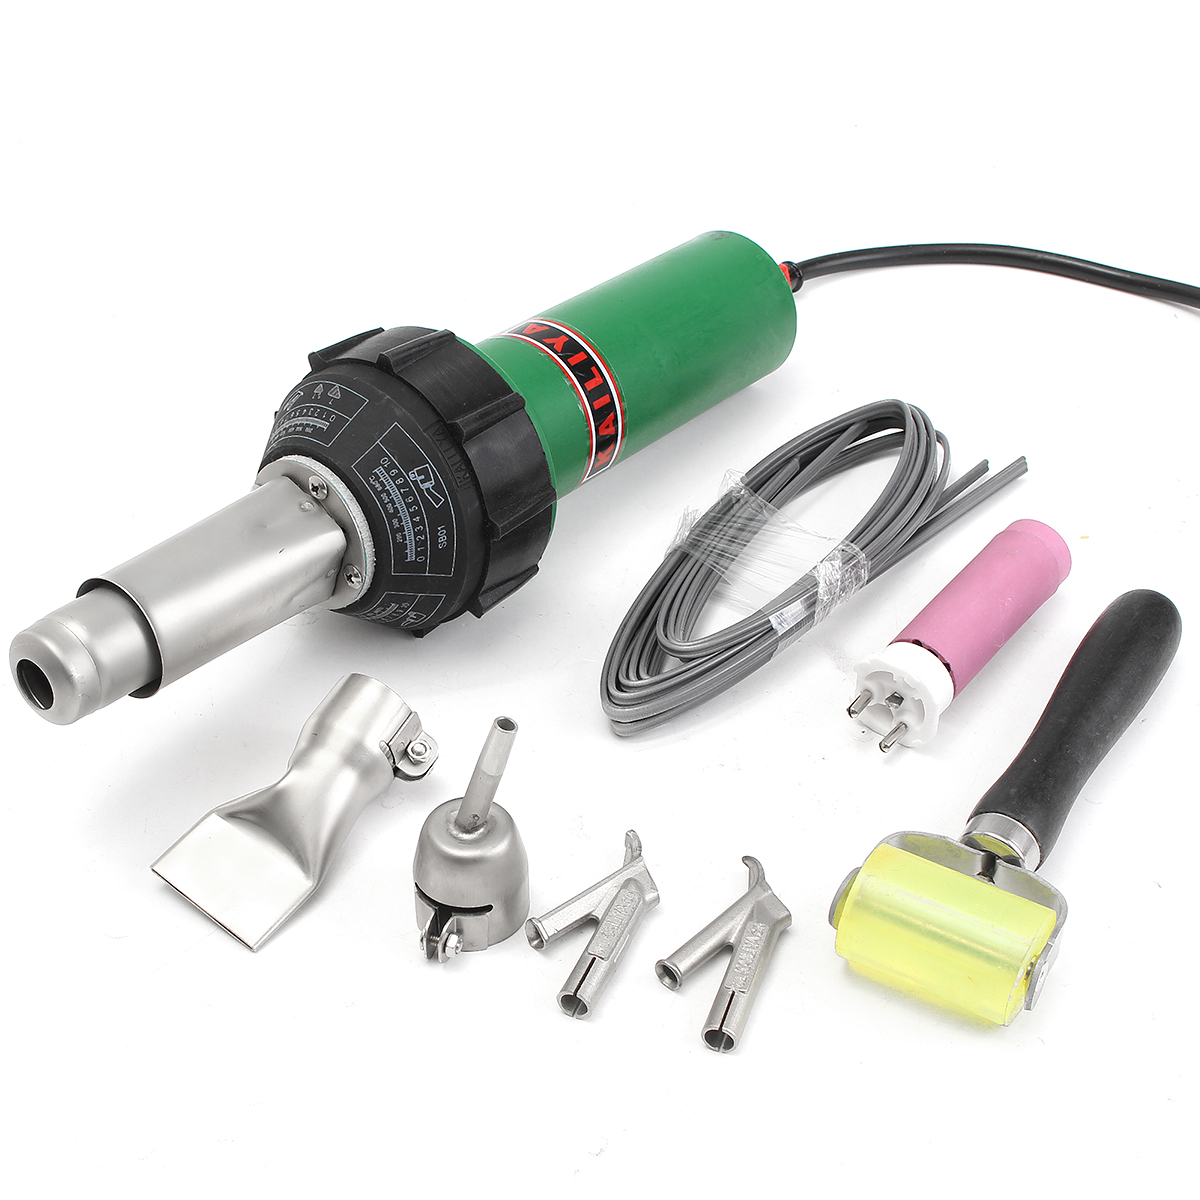 

1500W Plastic Welding Tool W/ 2 Speed Welding Nozzle And 1 HE Roller Hot Air Welding Torch Kits